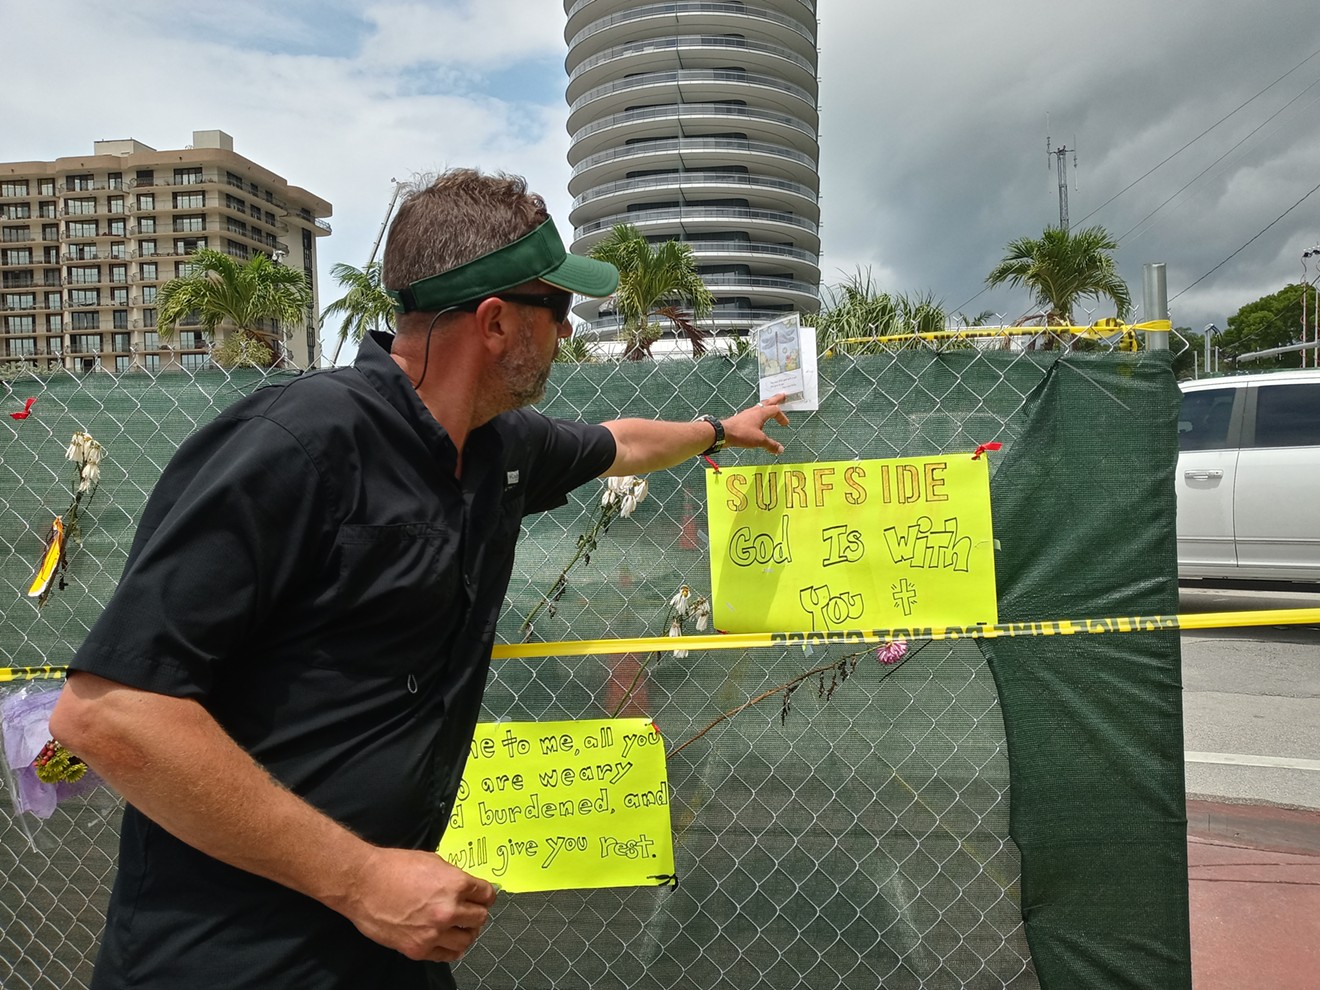 Scott Ritter traveled 200 miles from his home in Englewood, Florida, to lend a hand at the site of the Surfside building collapse.